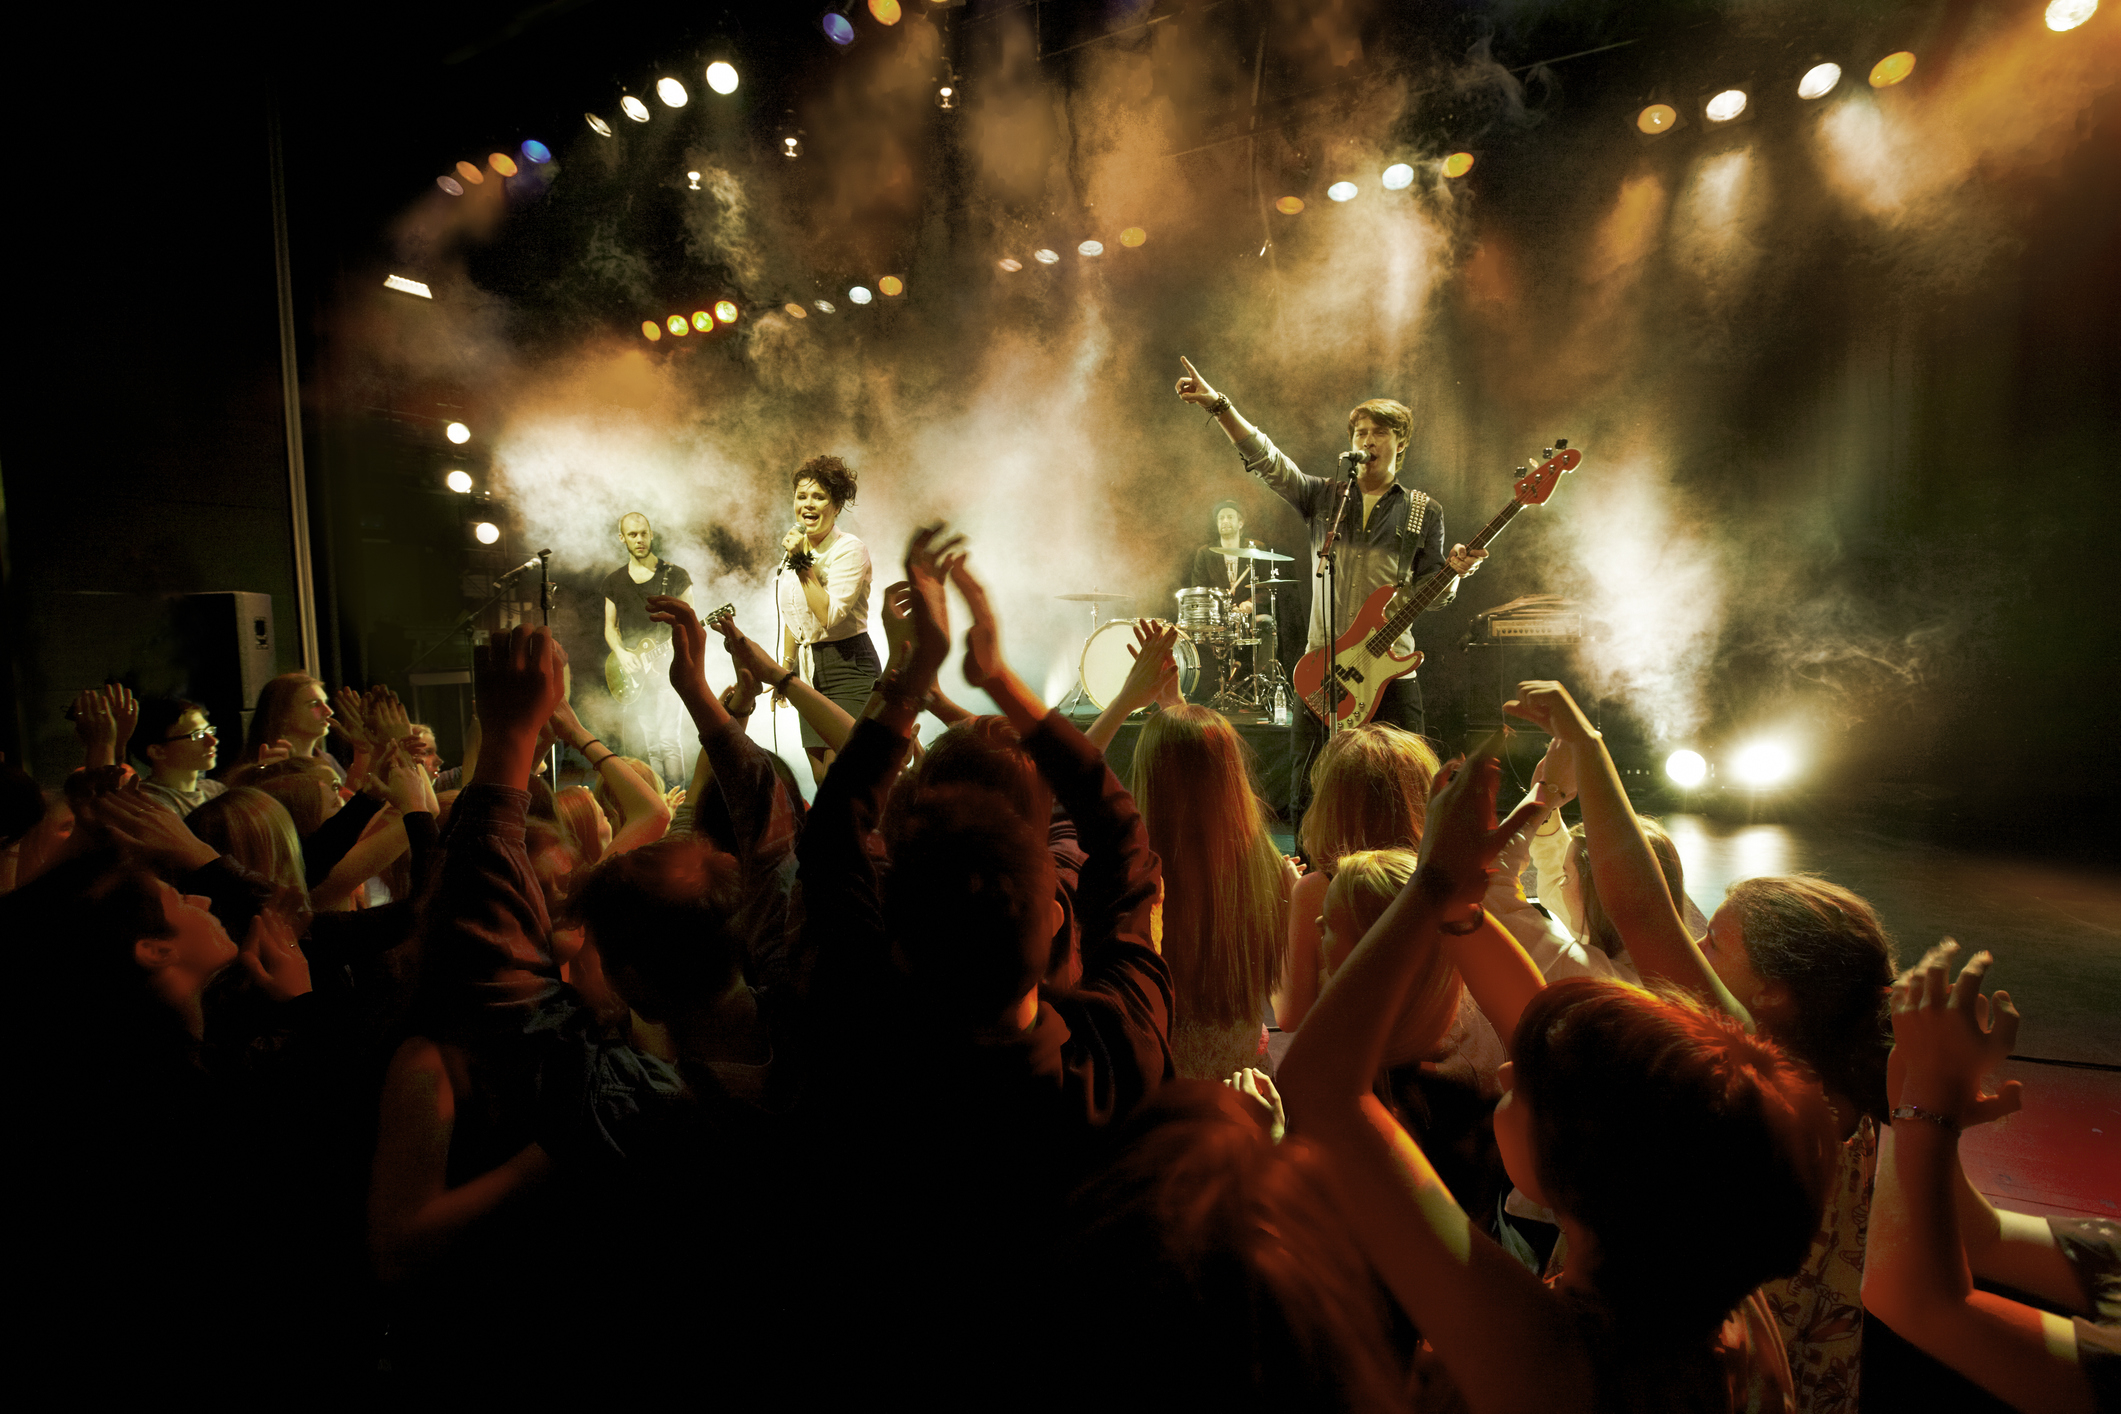 A band performs on stage in front of an enthusiastic crowd at a concert venue